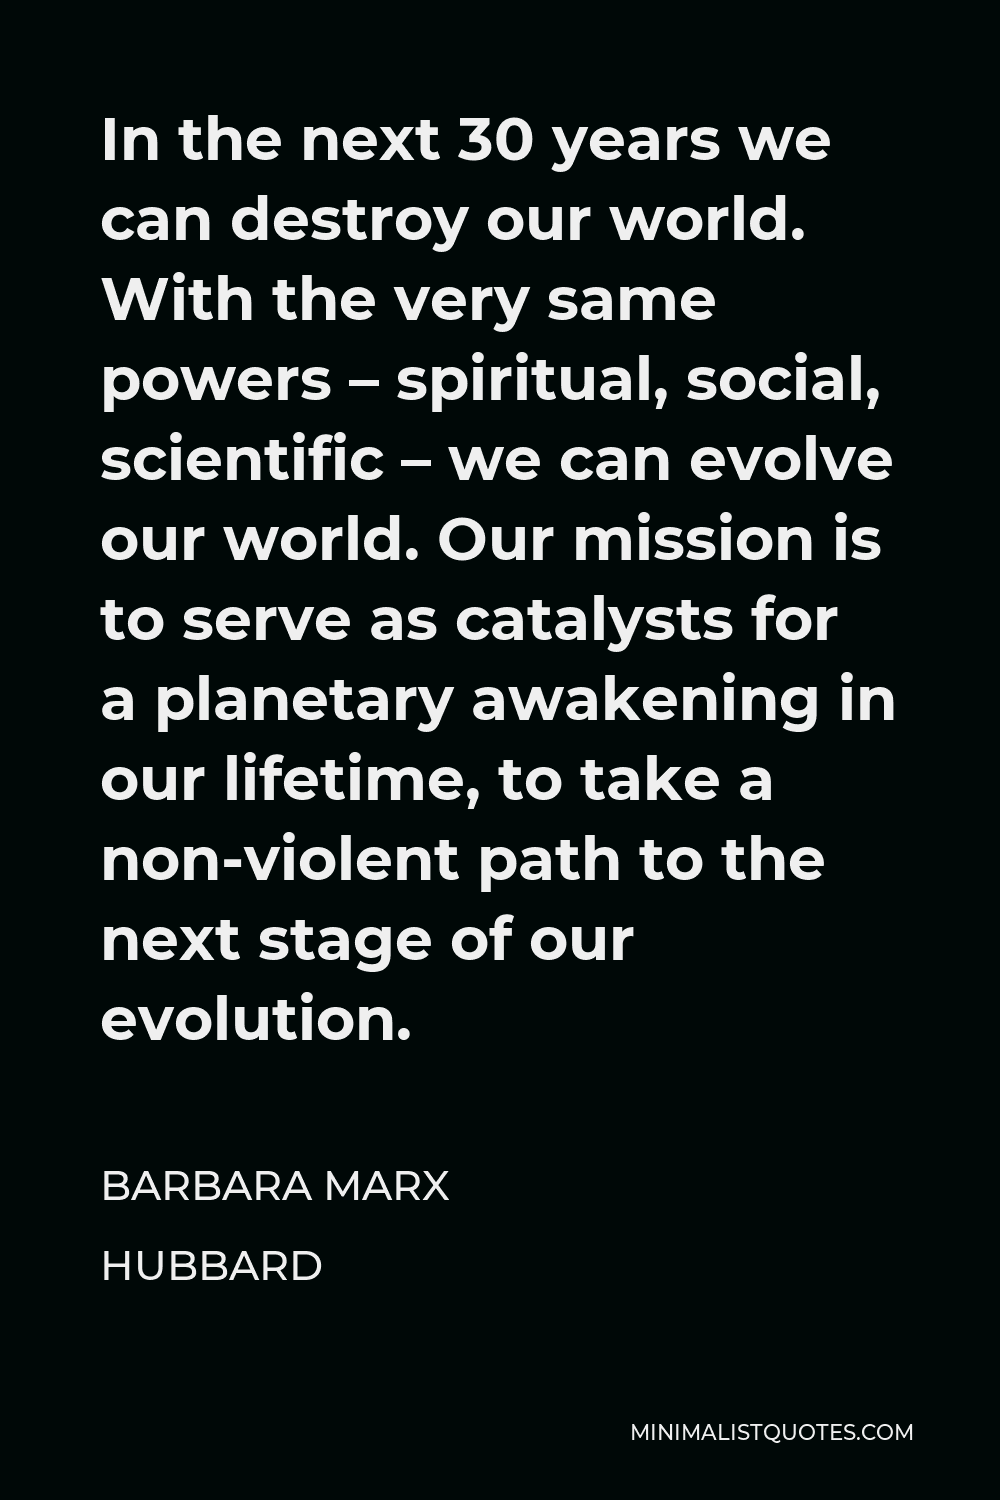 Barbara Marx Hubbard Quote - In the next 30 years we can destroy our world. With the very same powers – spiritual, social, scientific – we can evolve our world. Our mission is to serve as catalysts for a planetary awakening in our lifetime, to take a non-violent path to the next stage of our evolution.